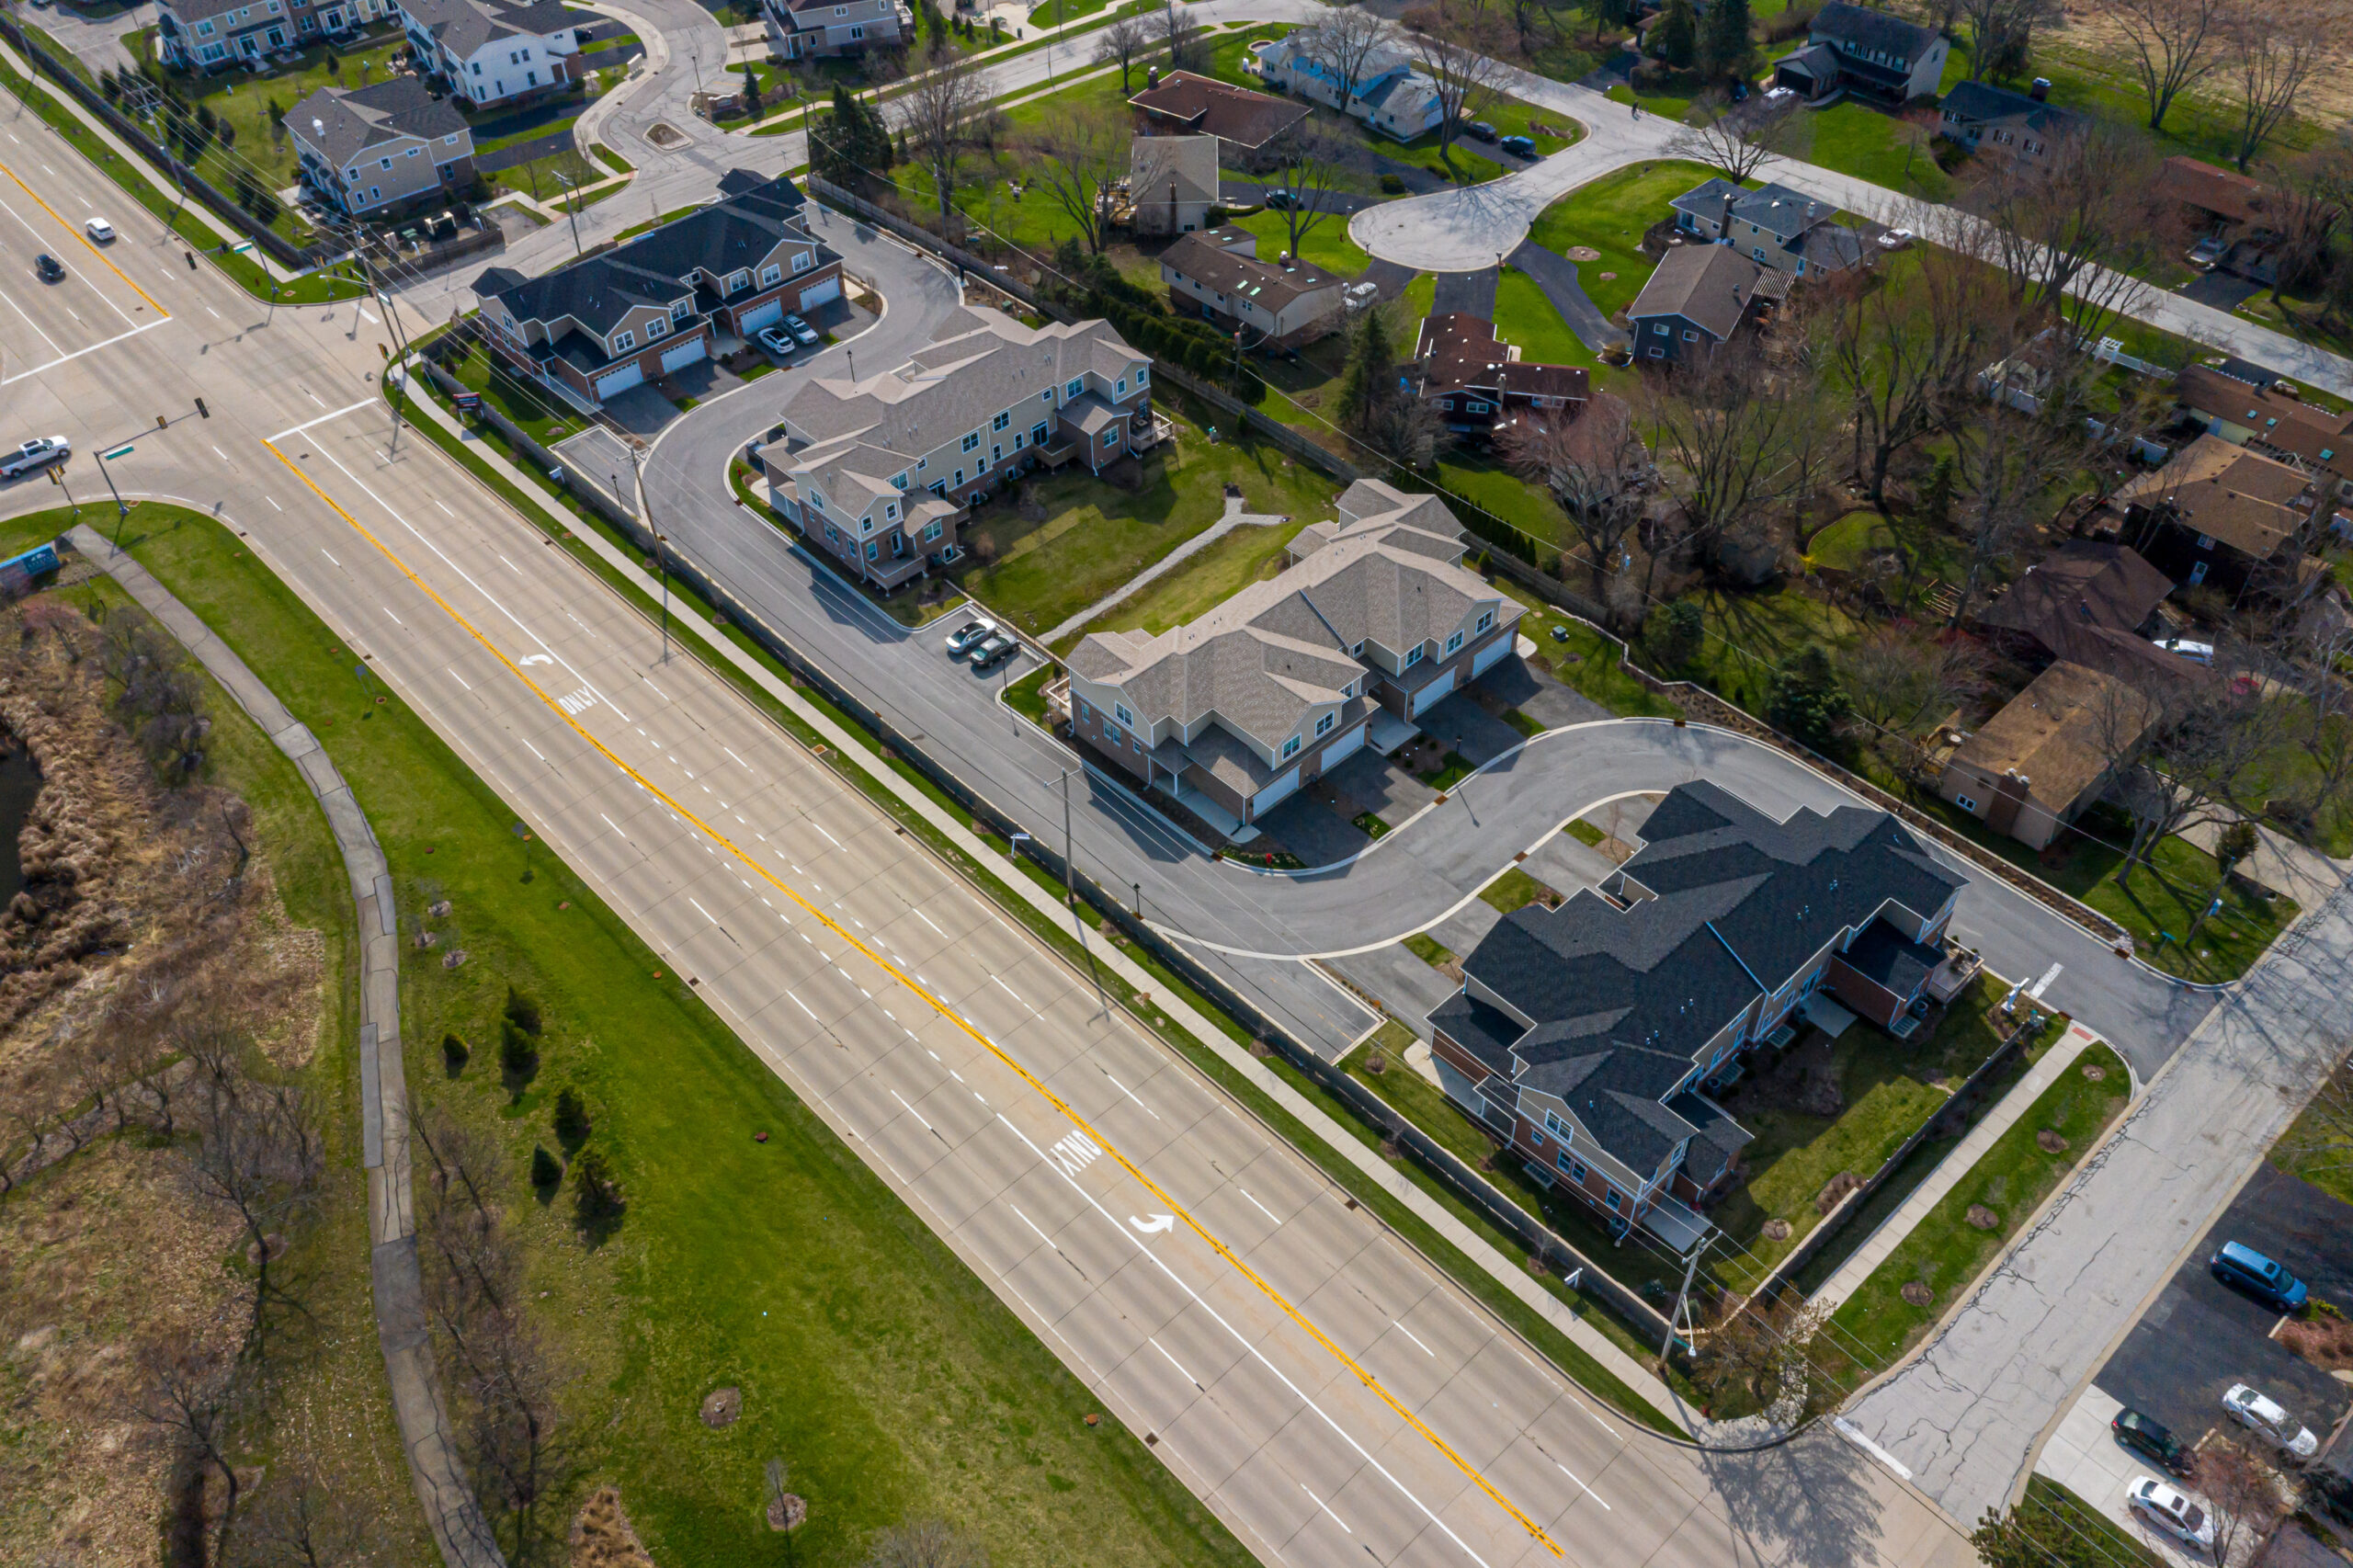 higher aerial view of Newberry Lane condo community that includes 4-lane highway, green spaces, and walking paths